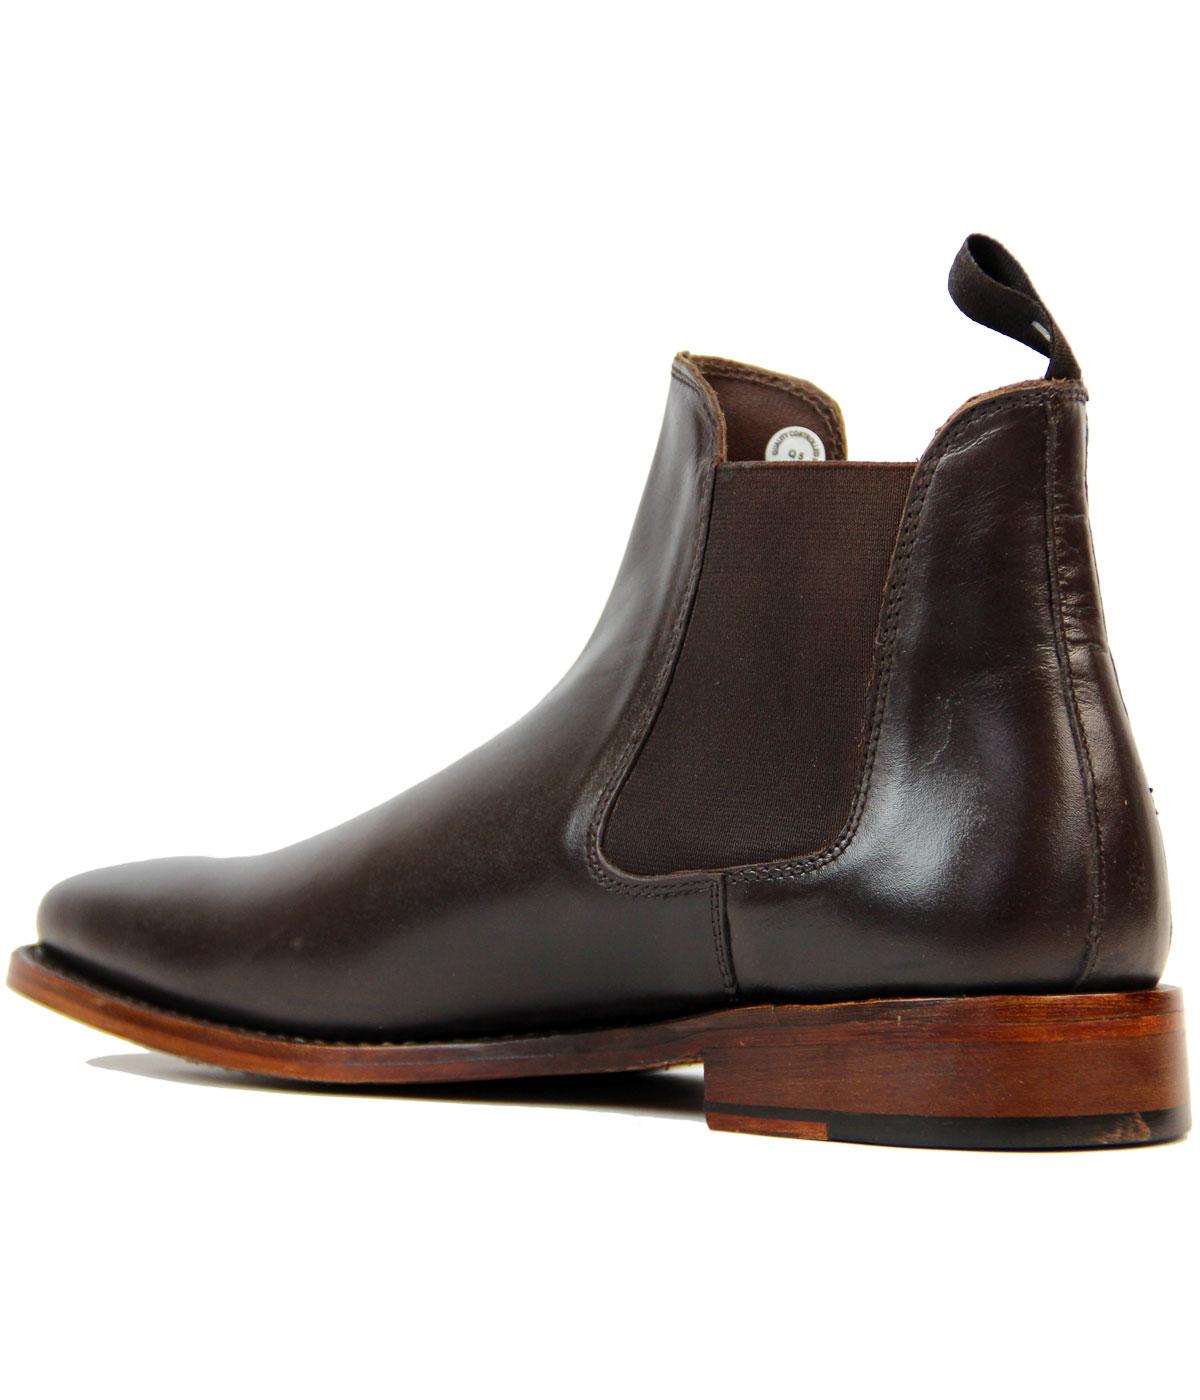 KENSINGTON Retro 1960s Mod Goodyear Welted Chelsea Boots in Brown